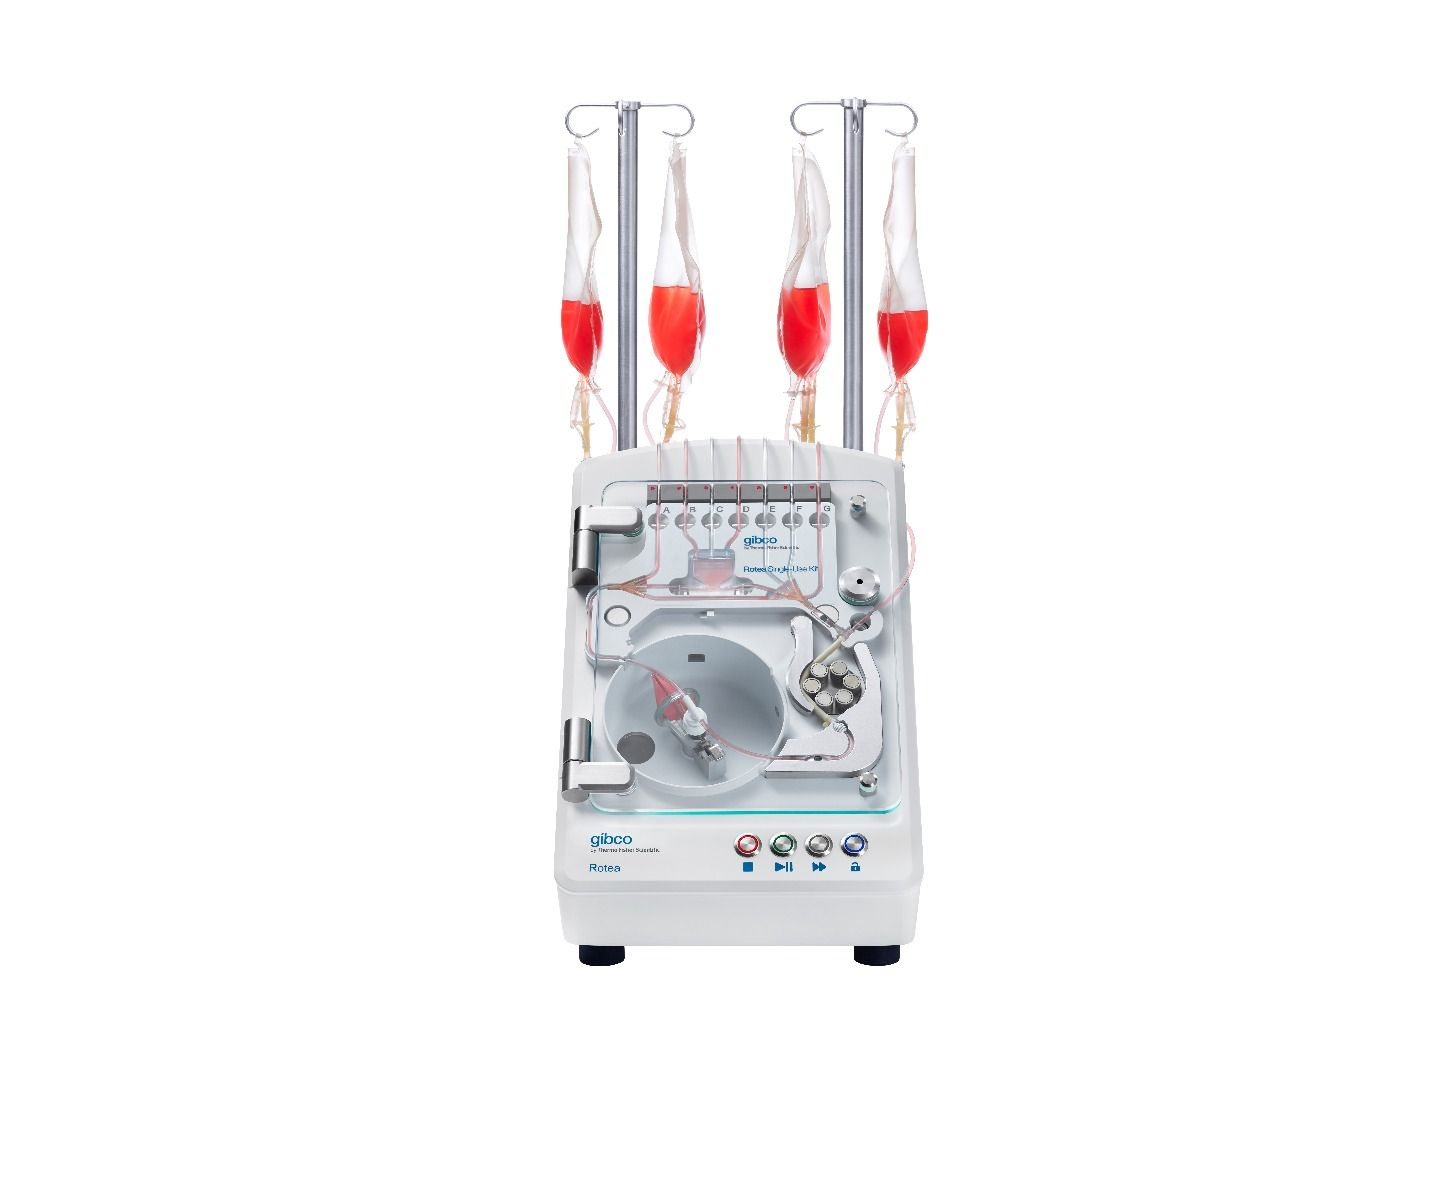 Gibco CTS Rotea Counterflow Centrifugation System